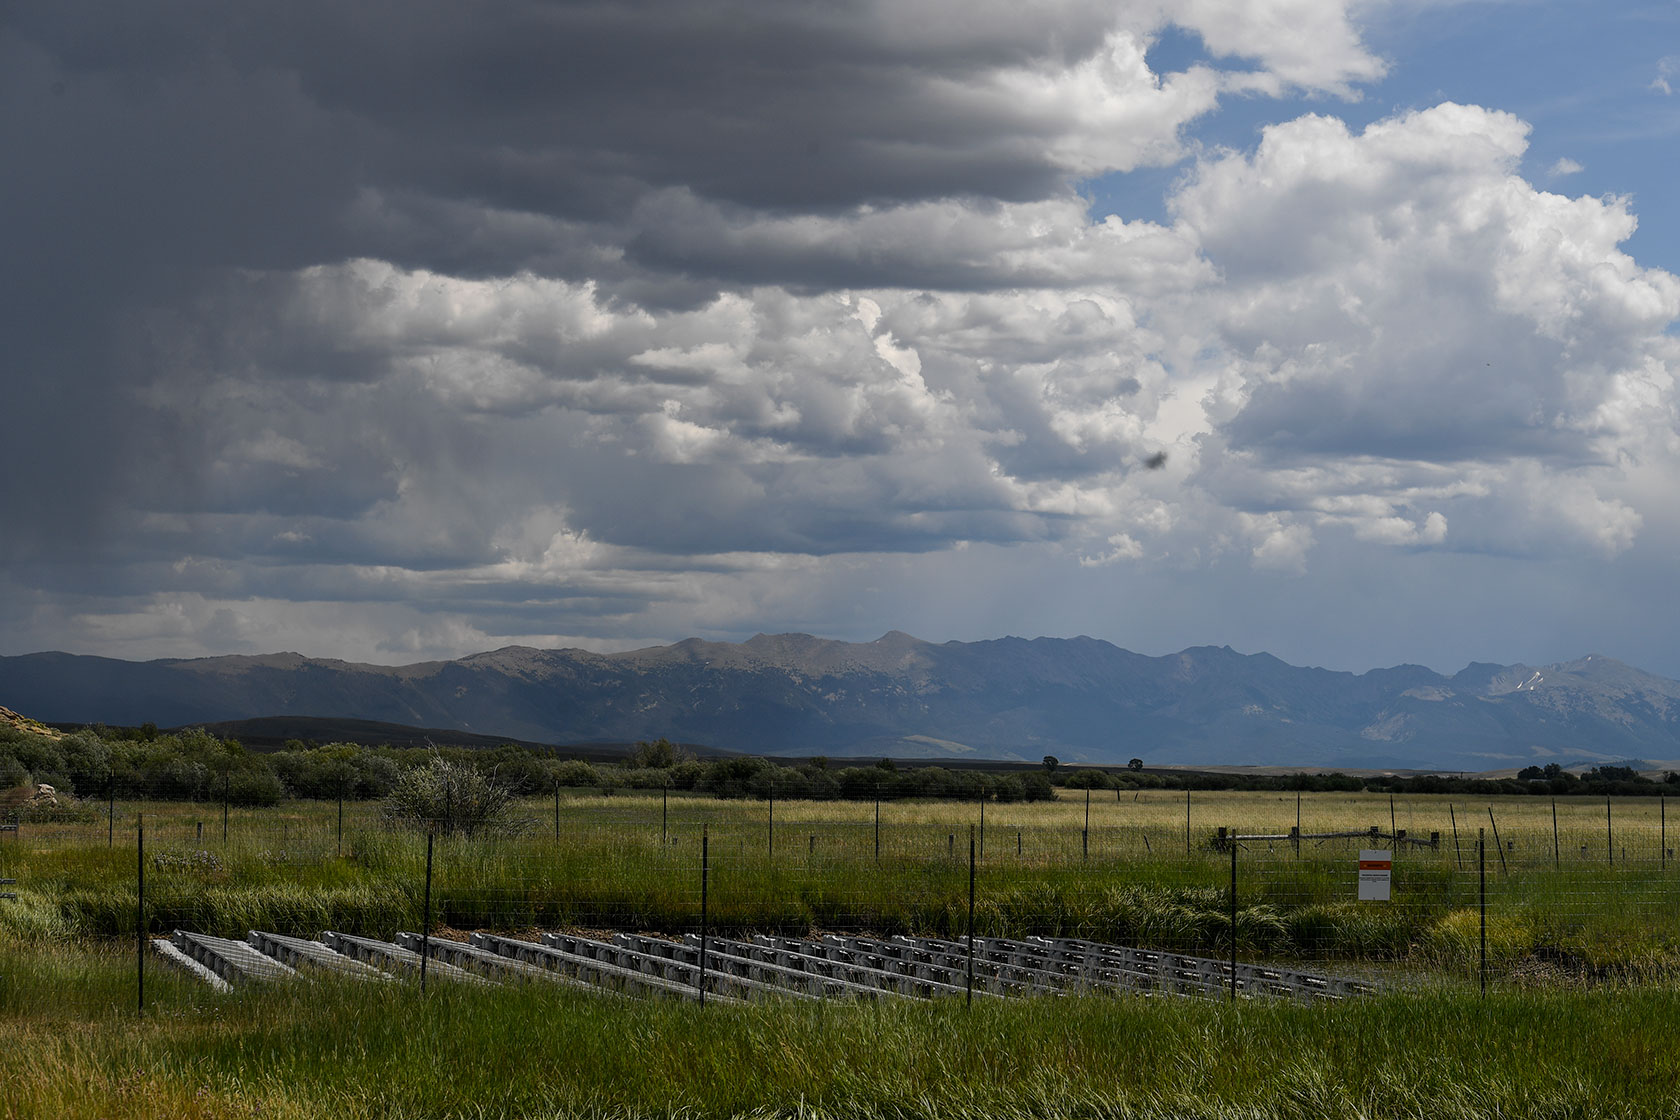 Photo shows a solar panel array in a green field with mountains in the background and a partly cloud sky